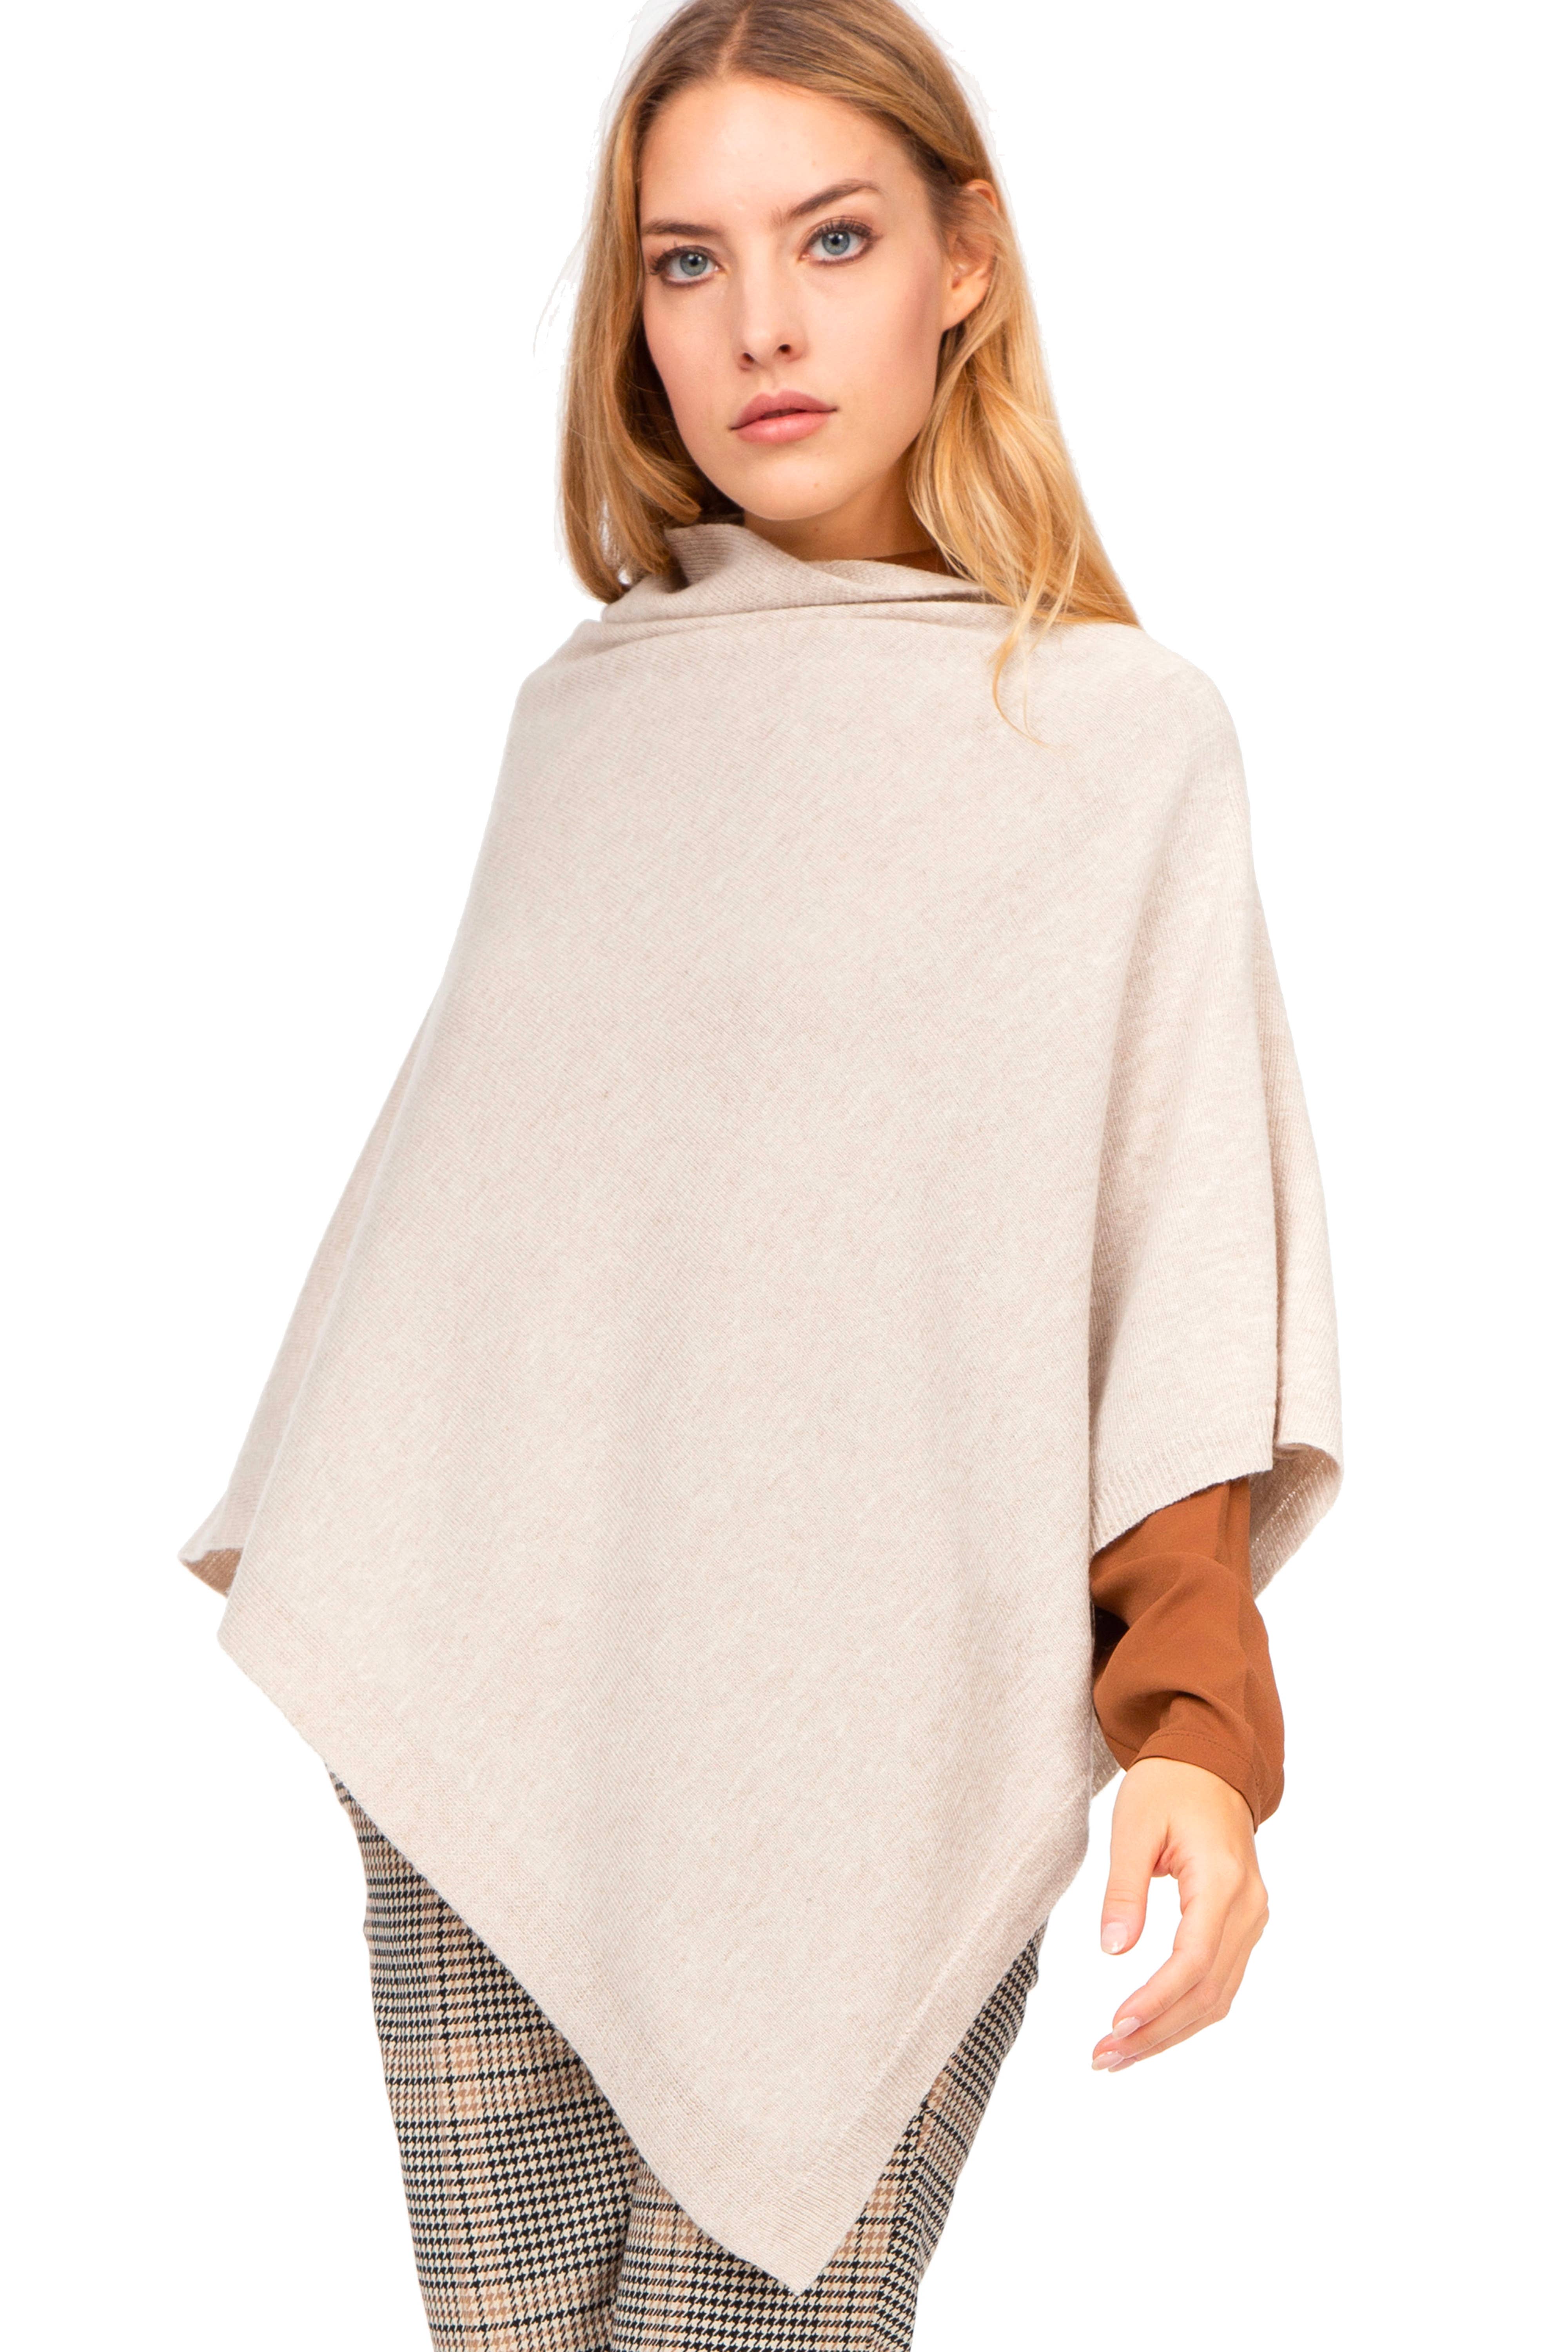 Cashmere Blend Poncho for Women MARINE CASHMERE Made in Italy Includes Gift Box Delicate and Soft Cashmere Yarn 